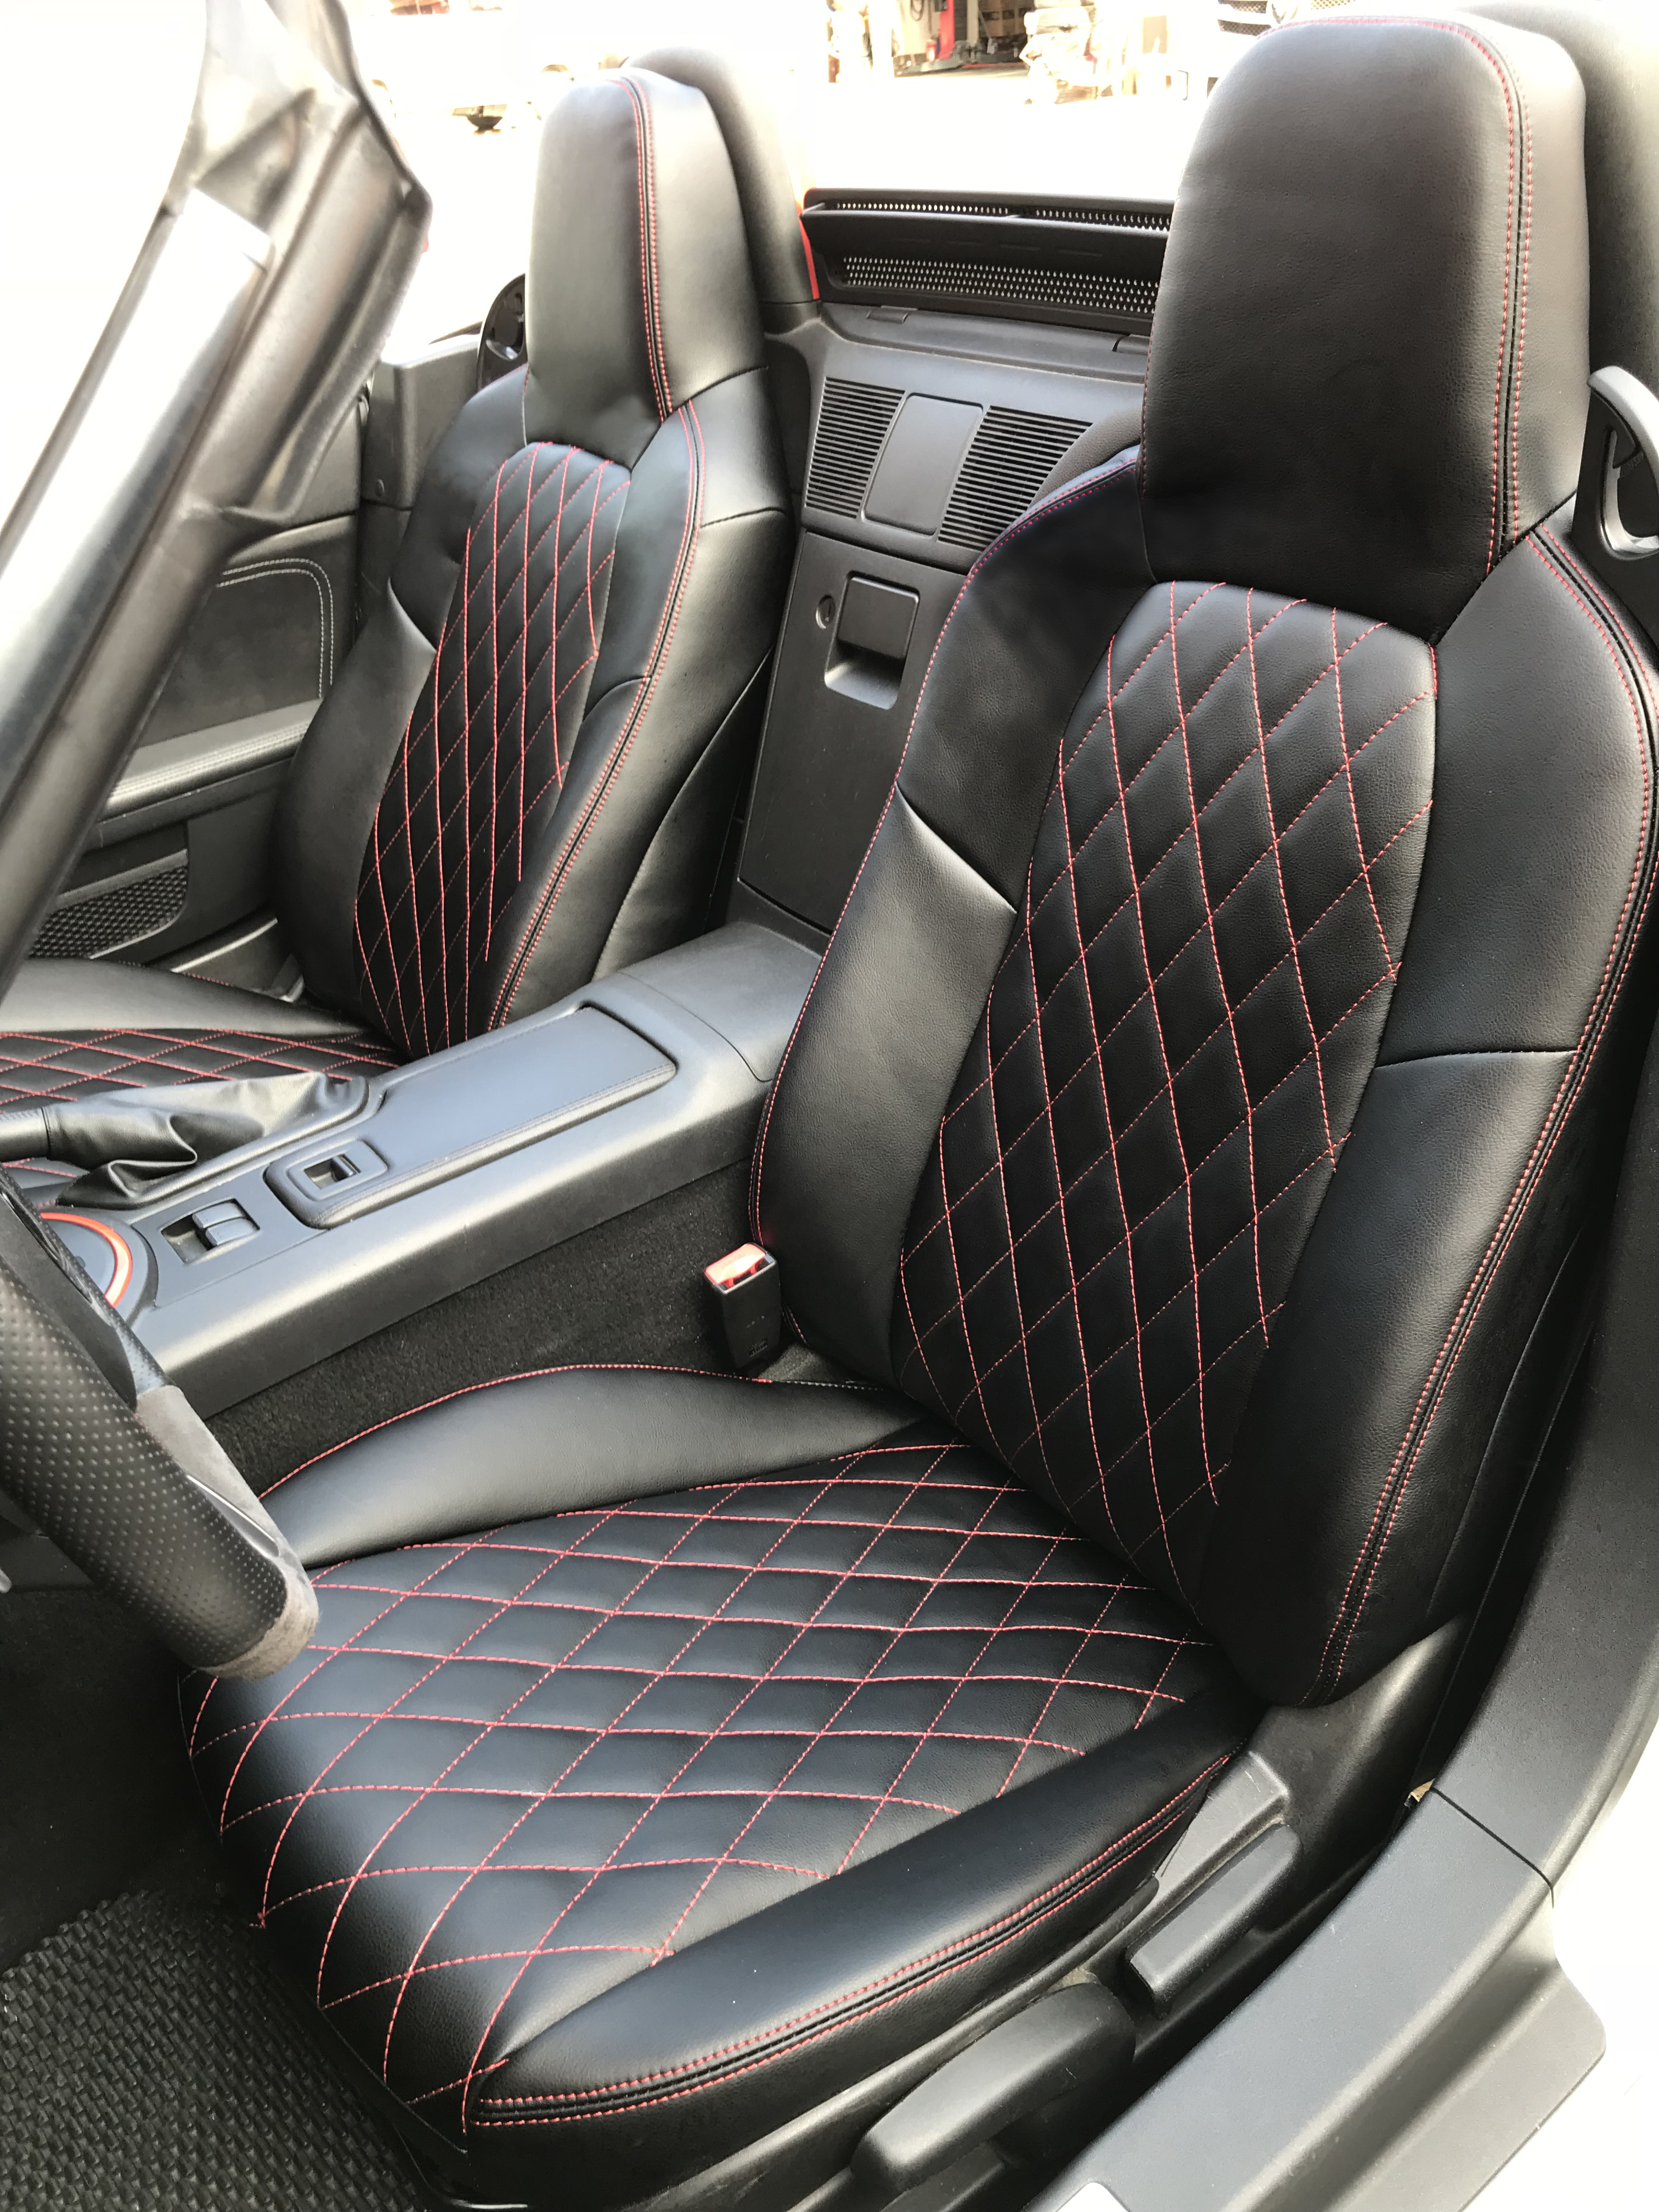 Quilted Seat Covers (Diamond Stitching) For Miata NC/Mk3 – The Ultimate